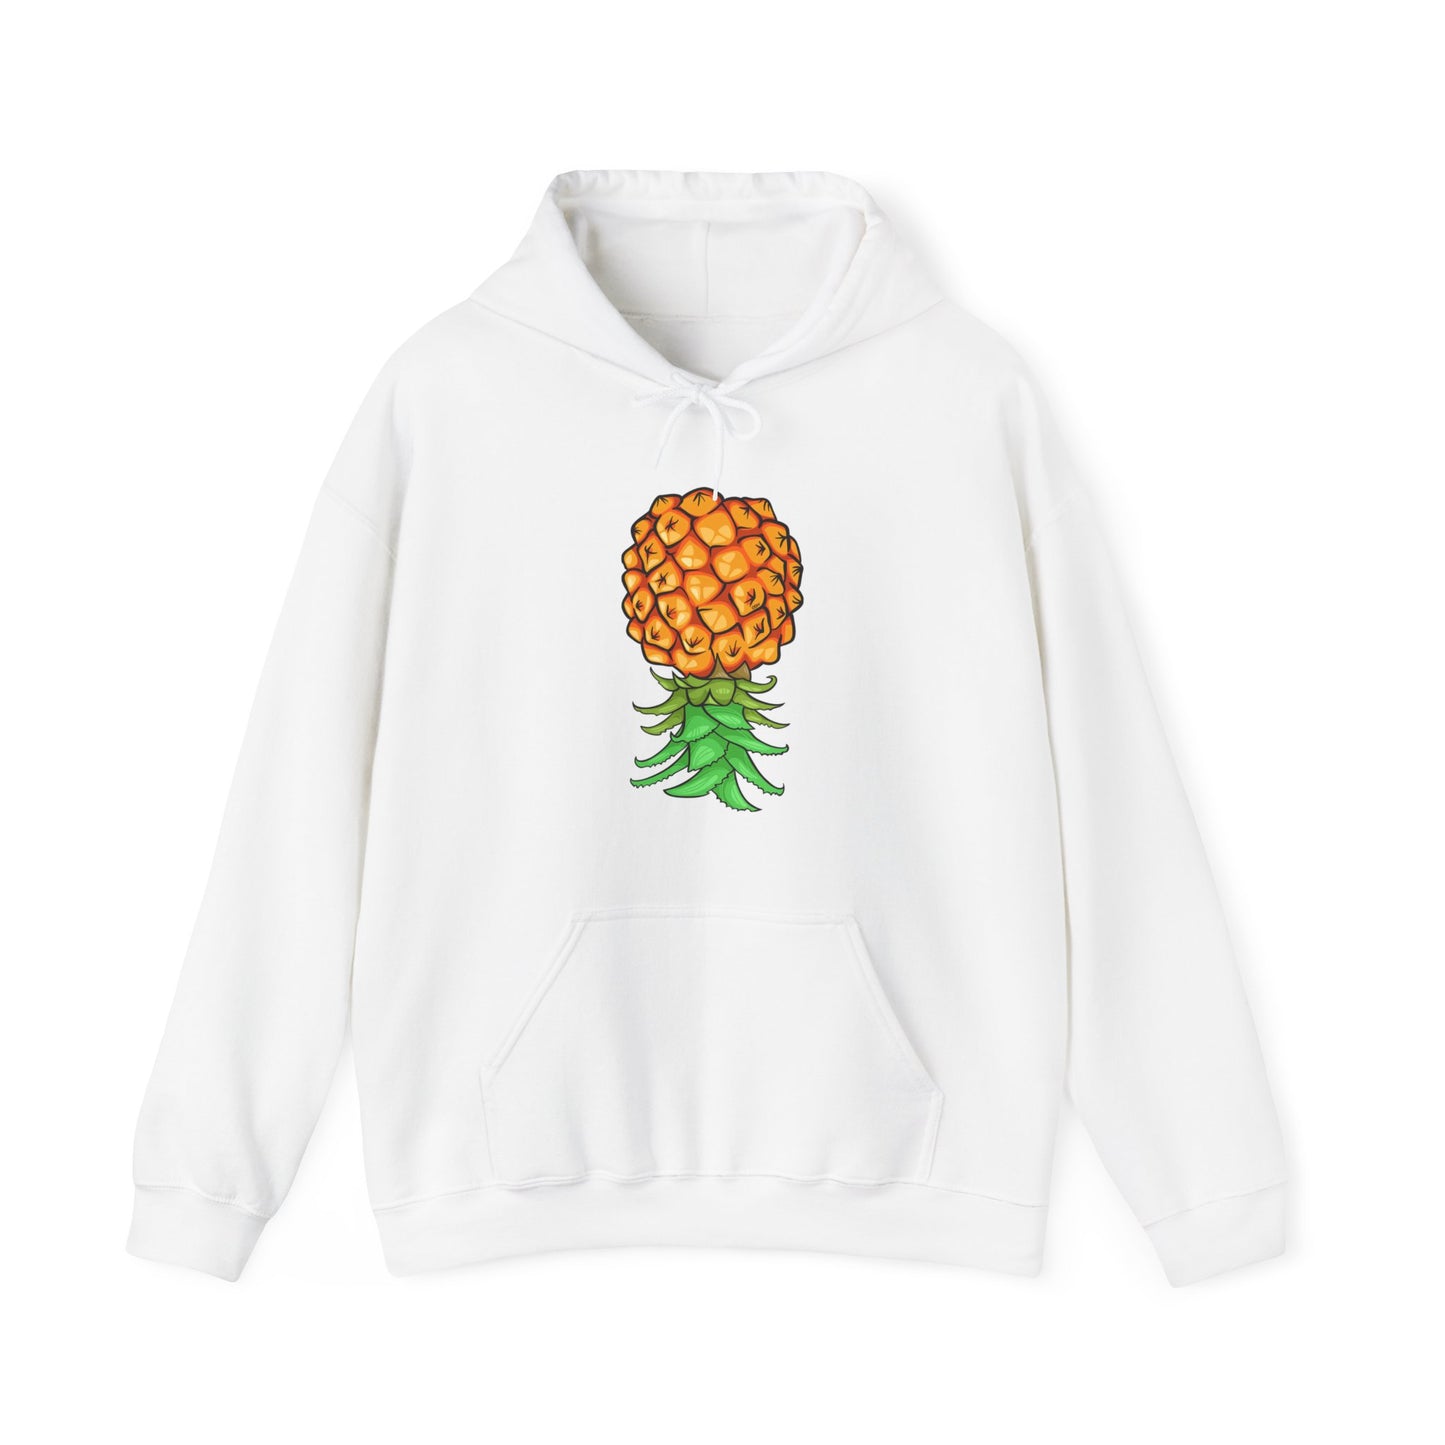 Upside Down Pineapple Hooded Sweatshirt If You Know You know